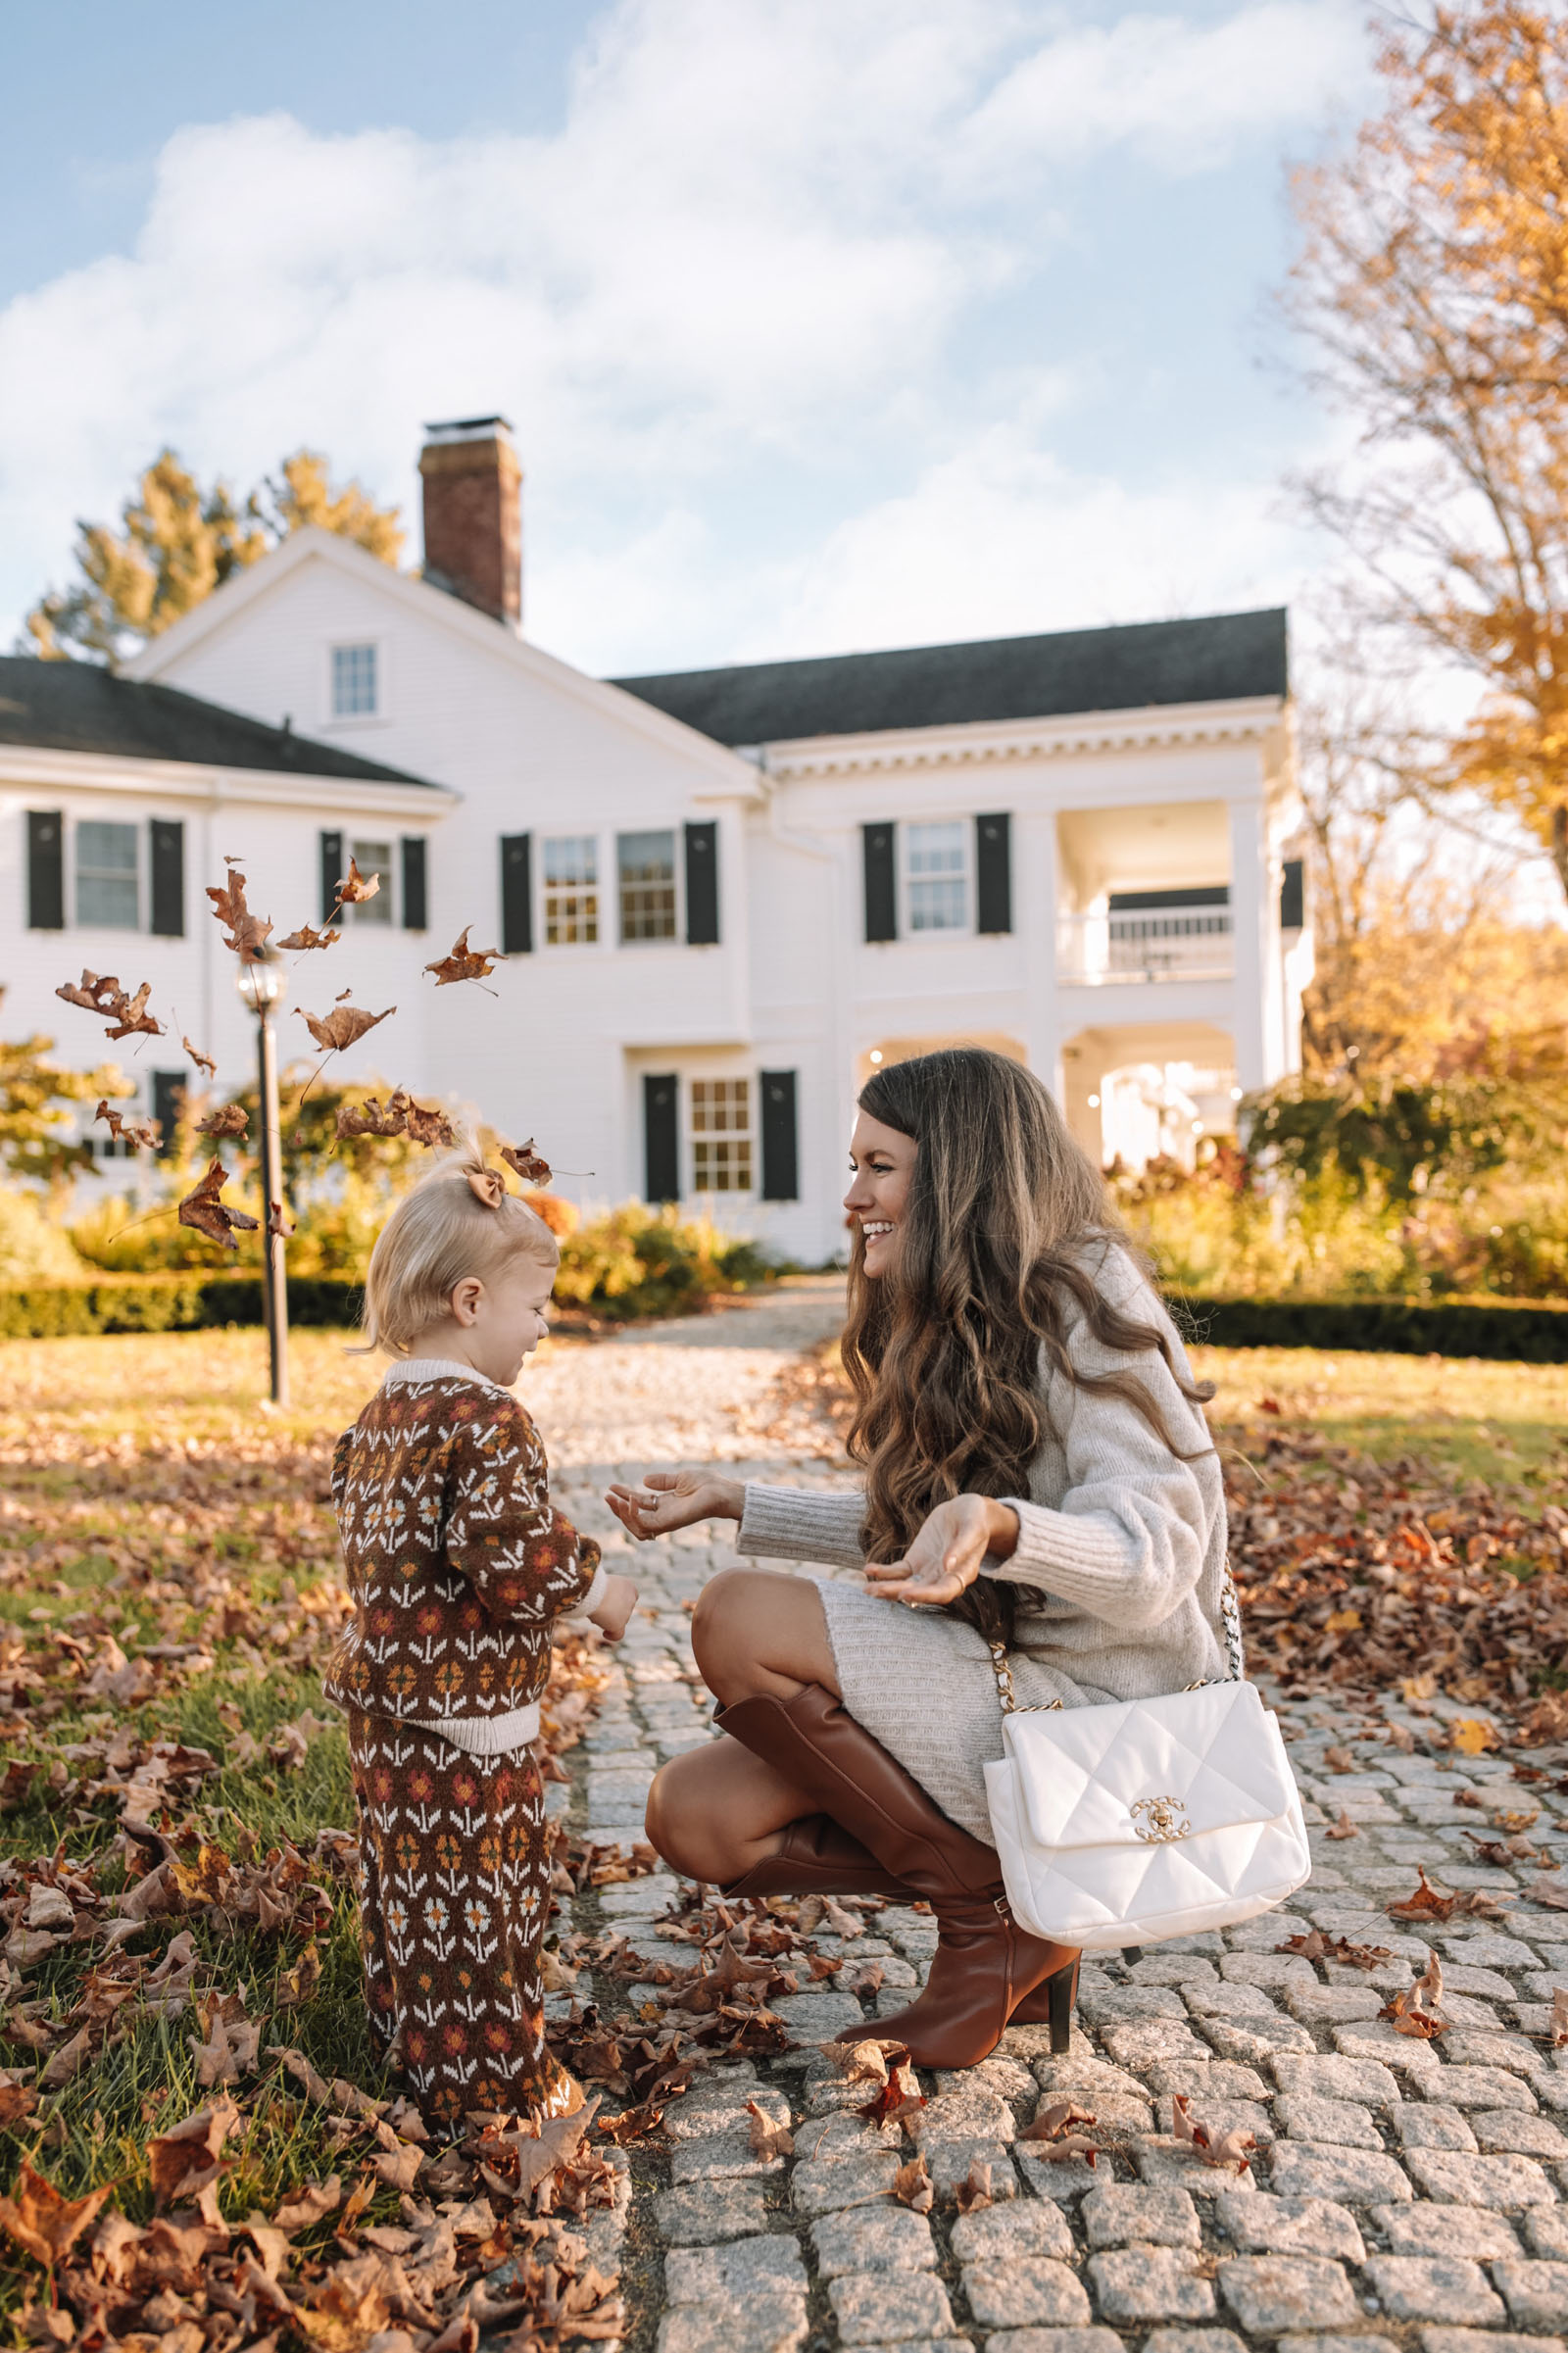 How to Plan a Fall Foliage Road Trip - Southern Curls & Pearls